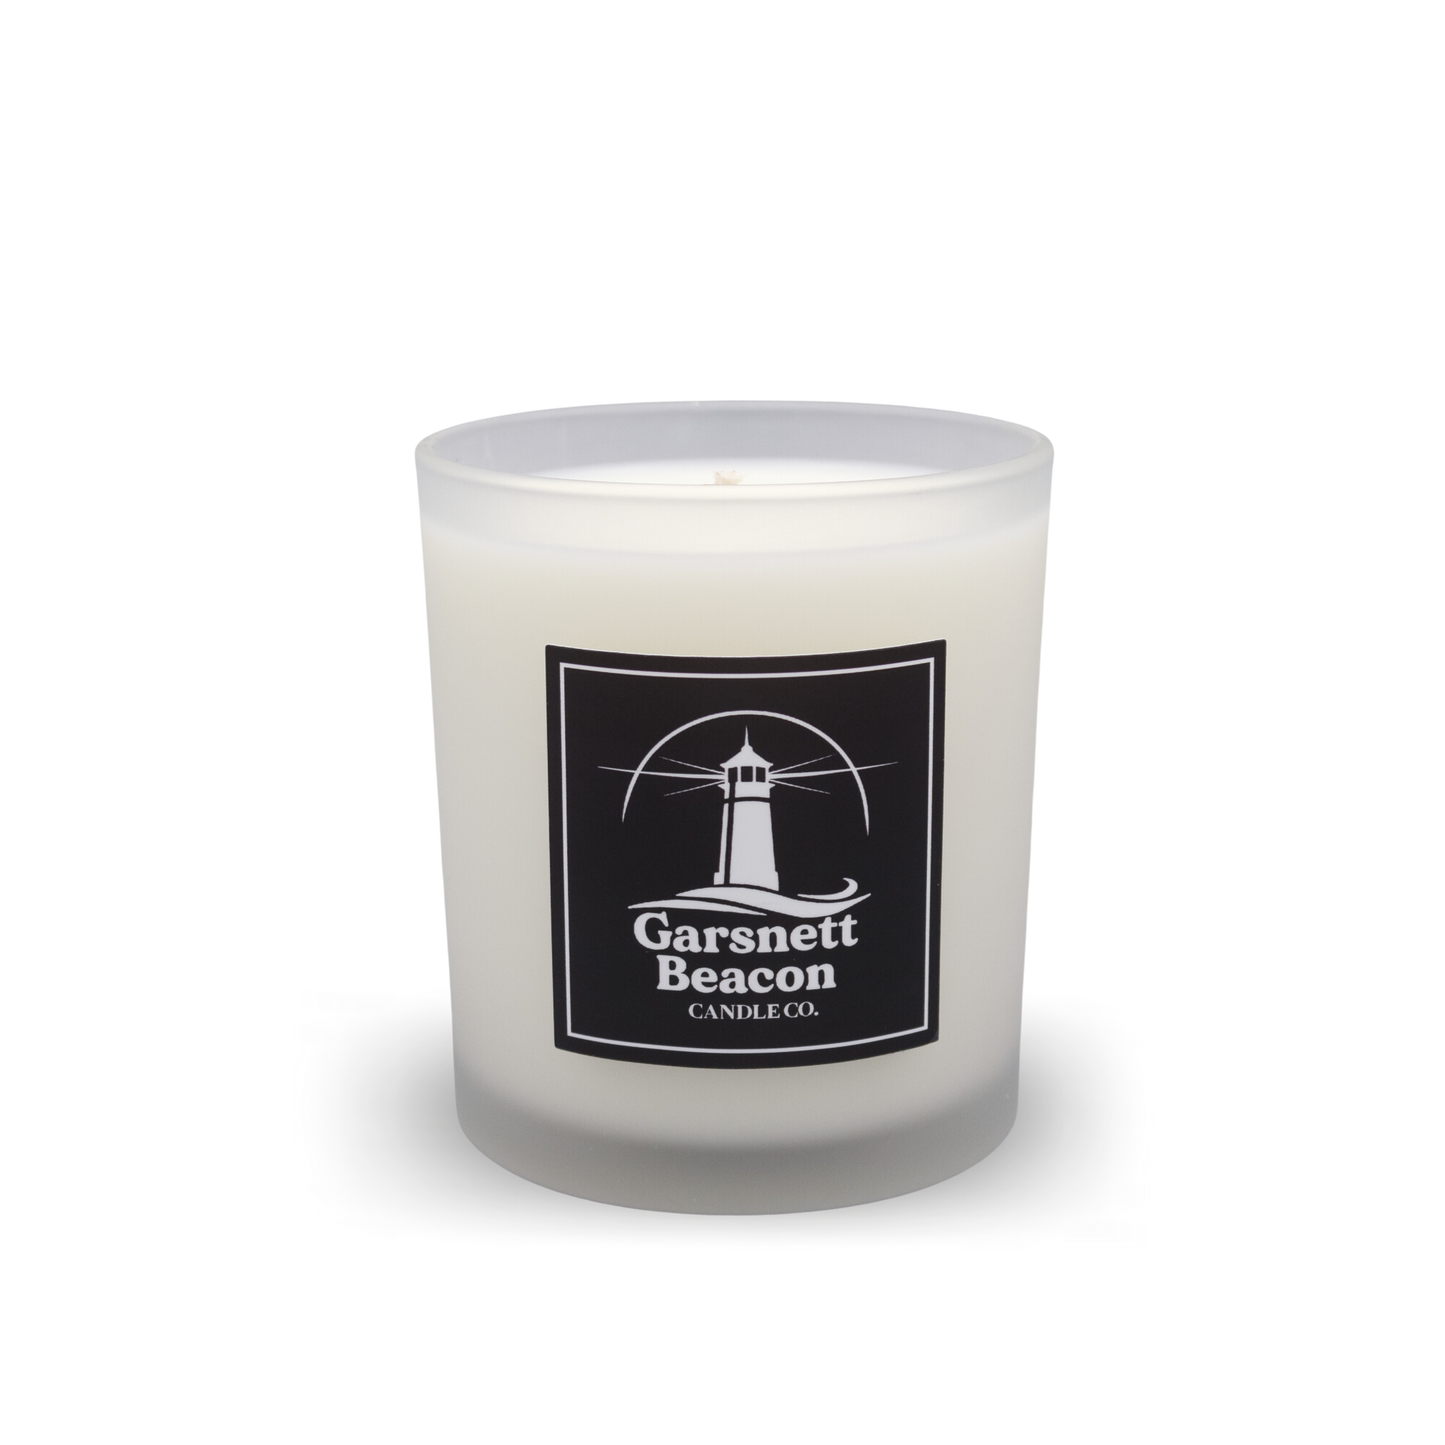 Cucumber Limeade - July Candle of the Month